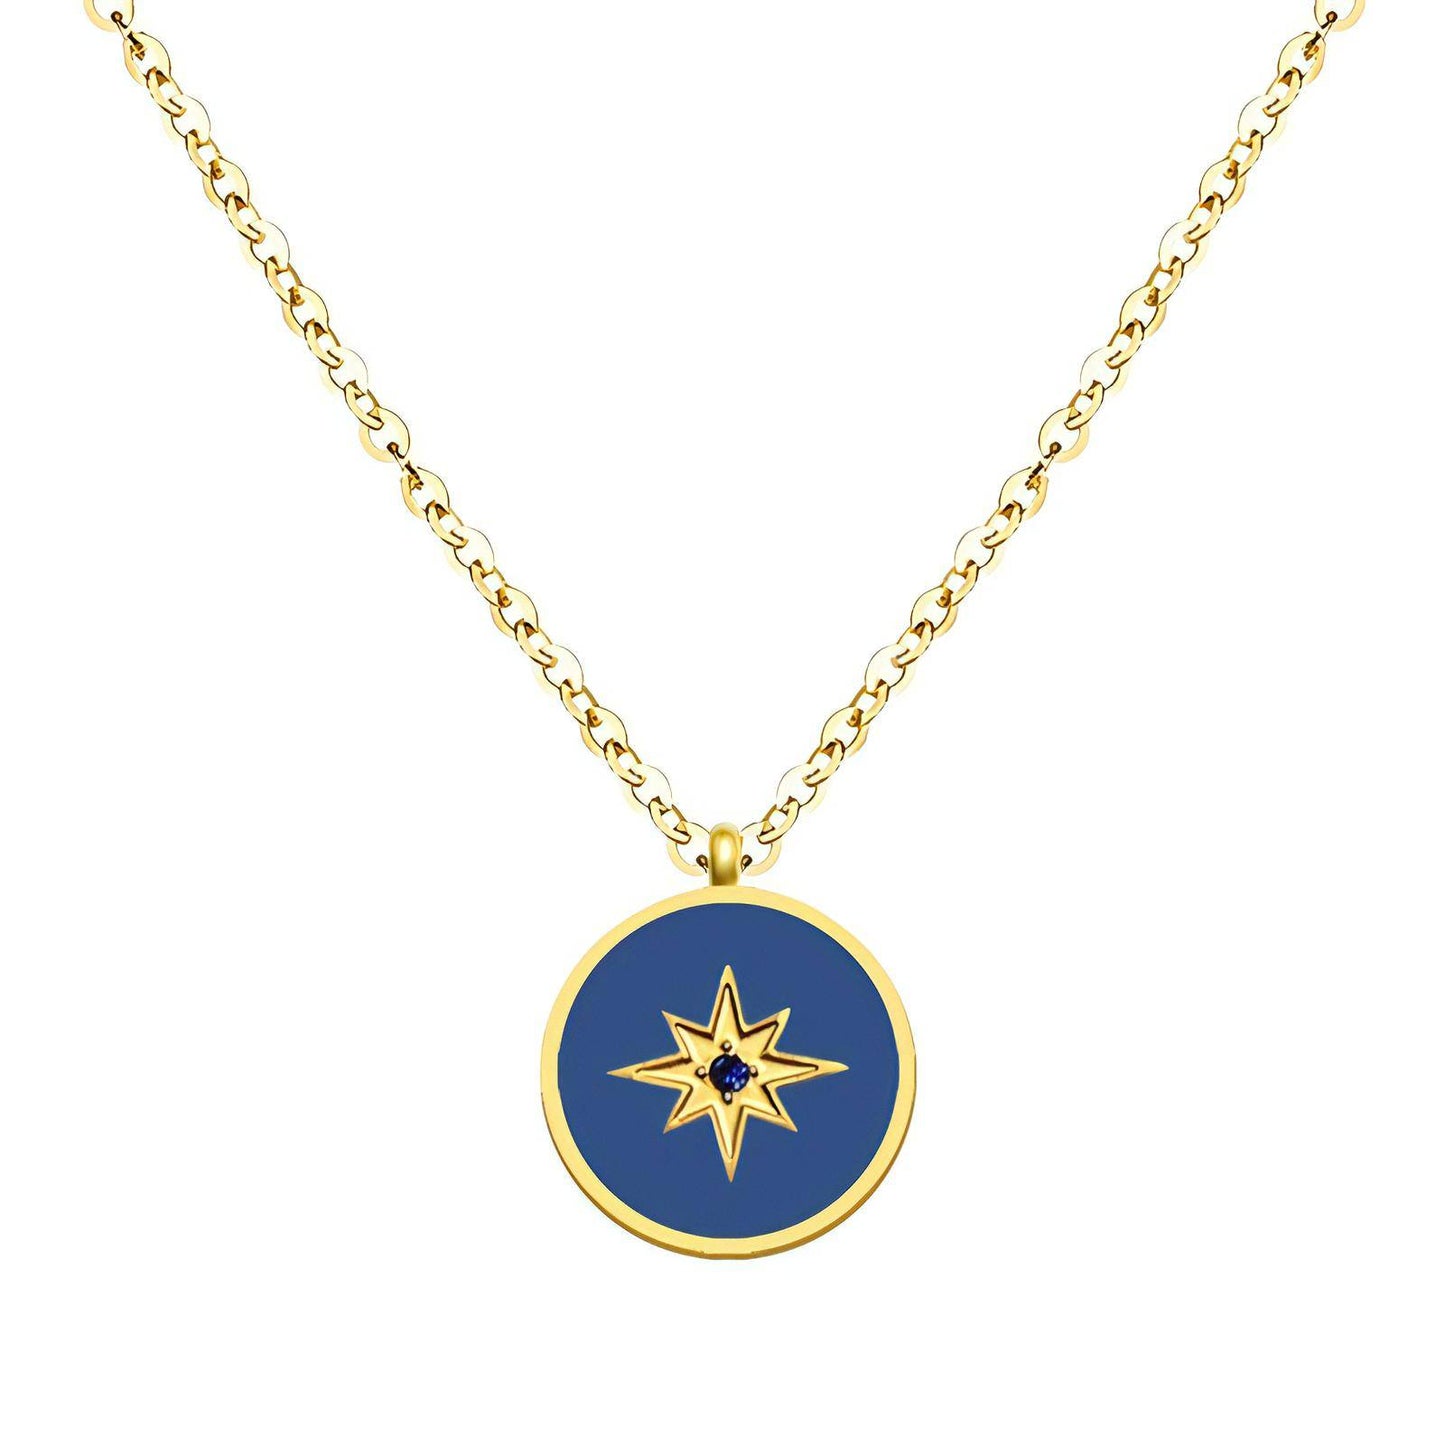 18K gold plated Stainless steel  Star necklace